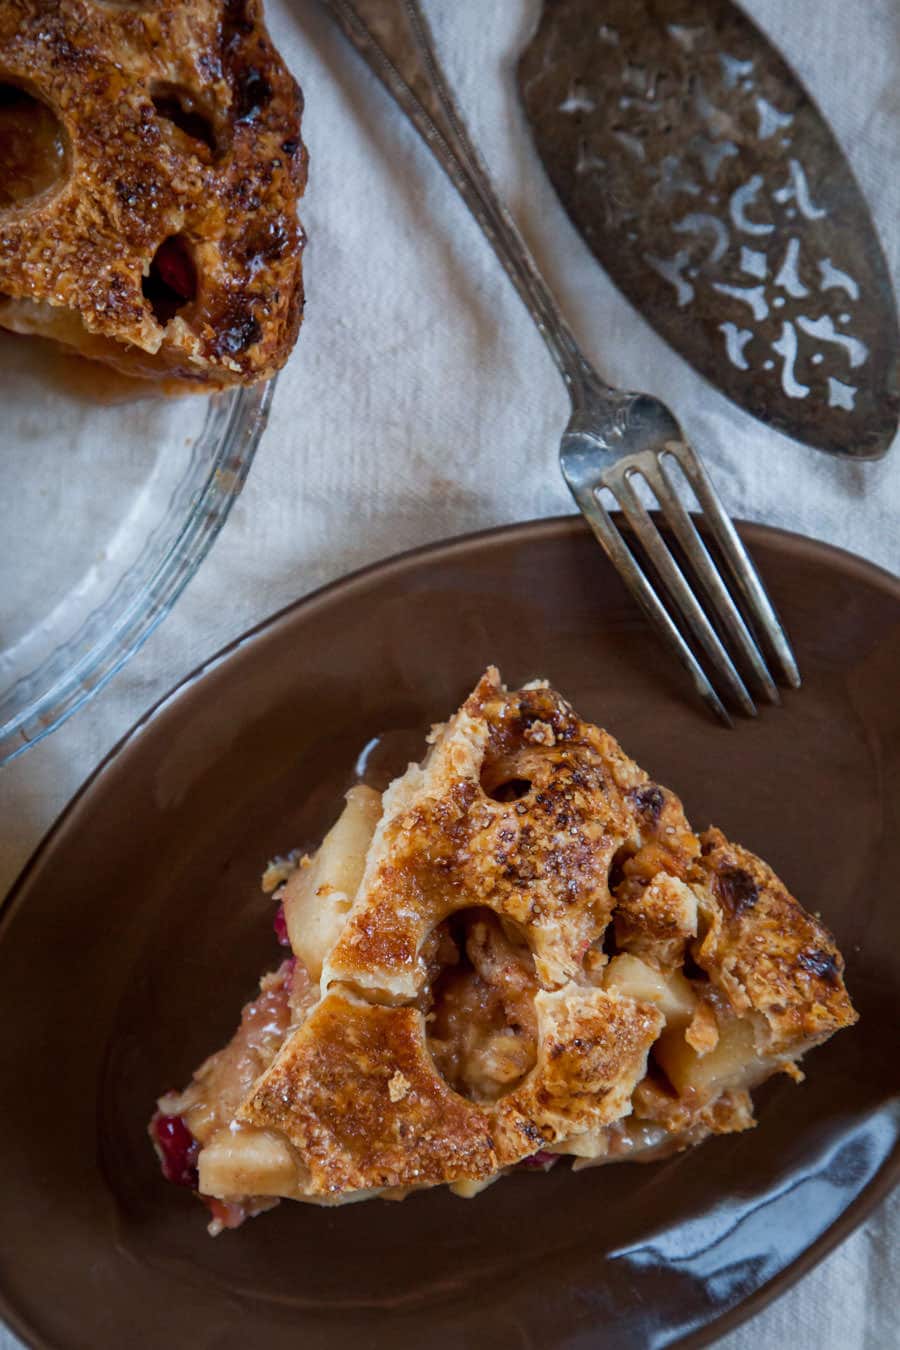 Apple Cranberry Pie with Almond Butter Crust. Photo and recipe by Irvin Lin of Eat the Love.